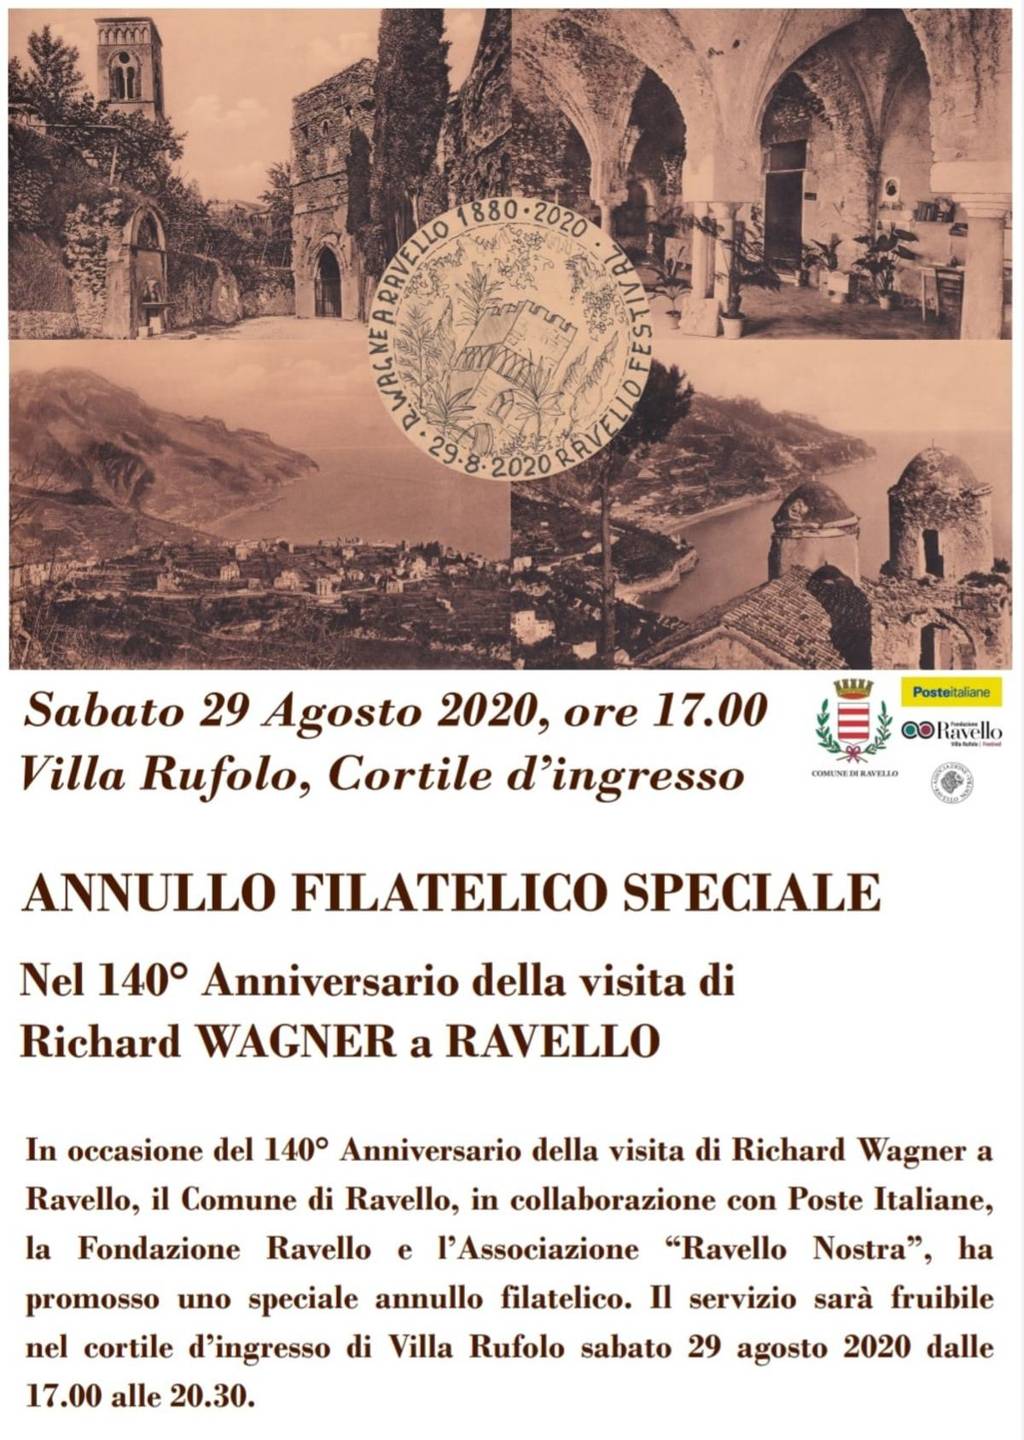 Cancellation (mail): Richard Wagner in Ravello